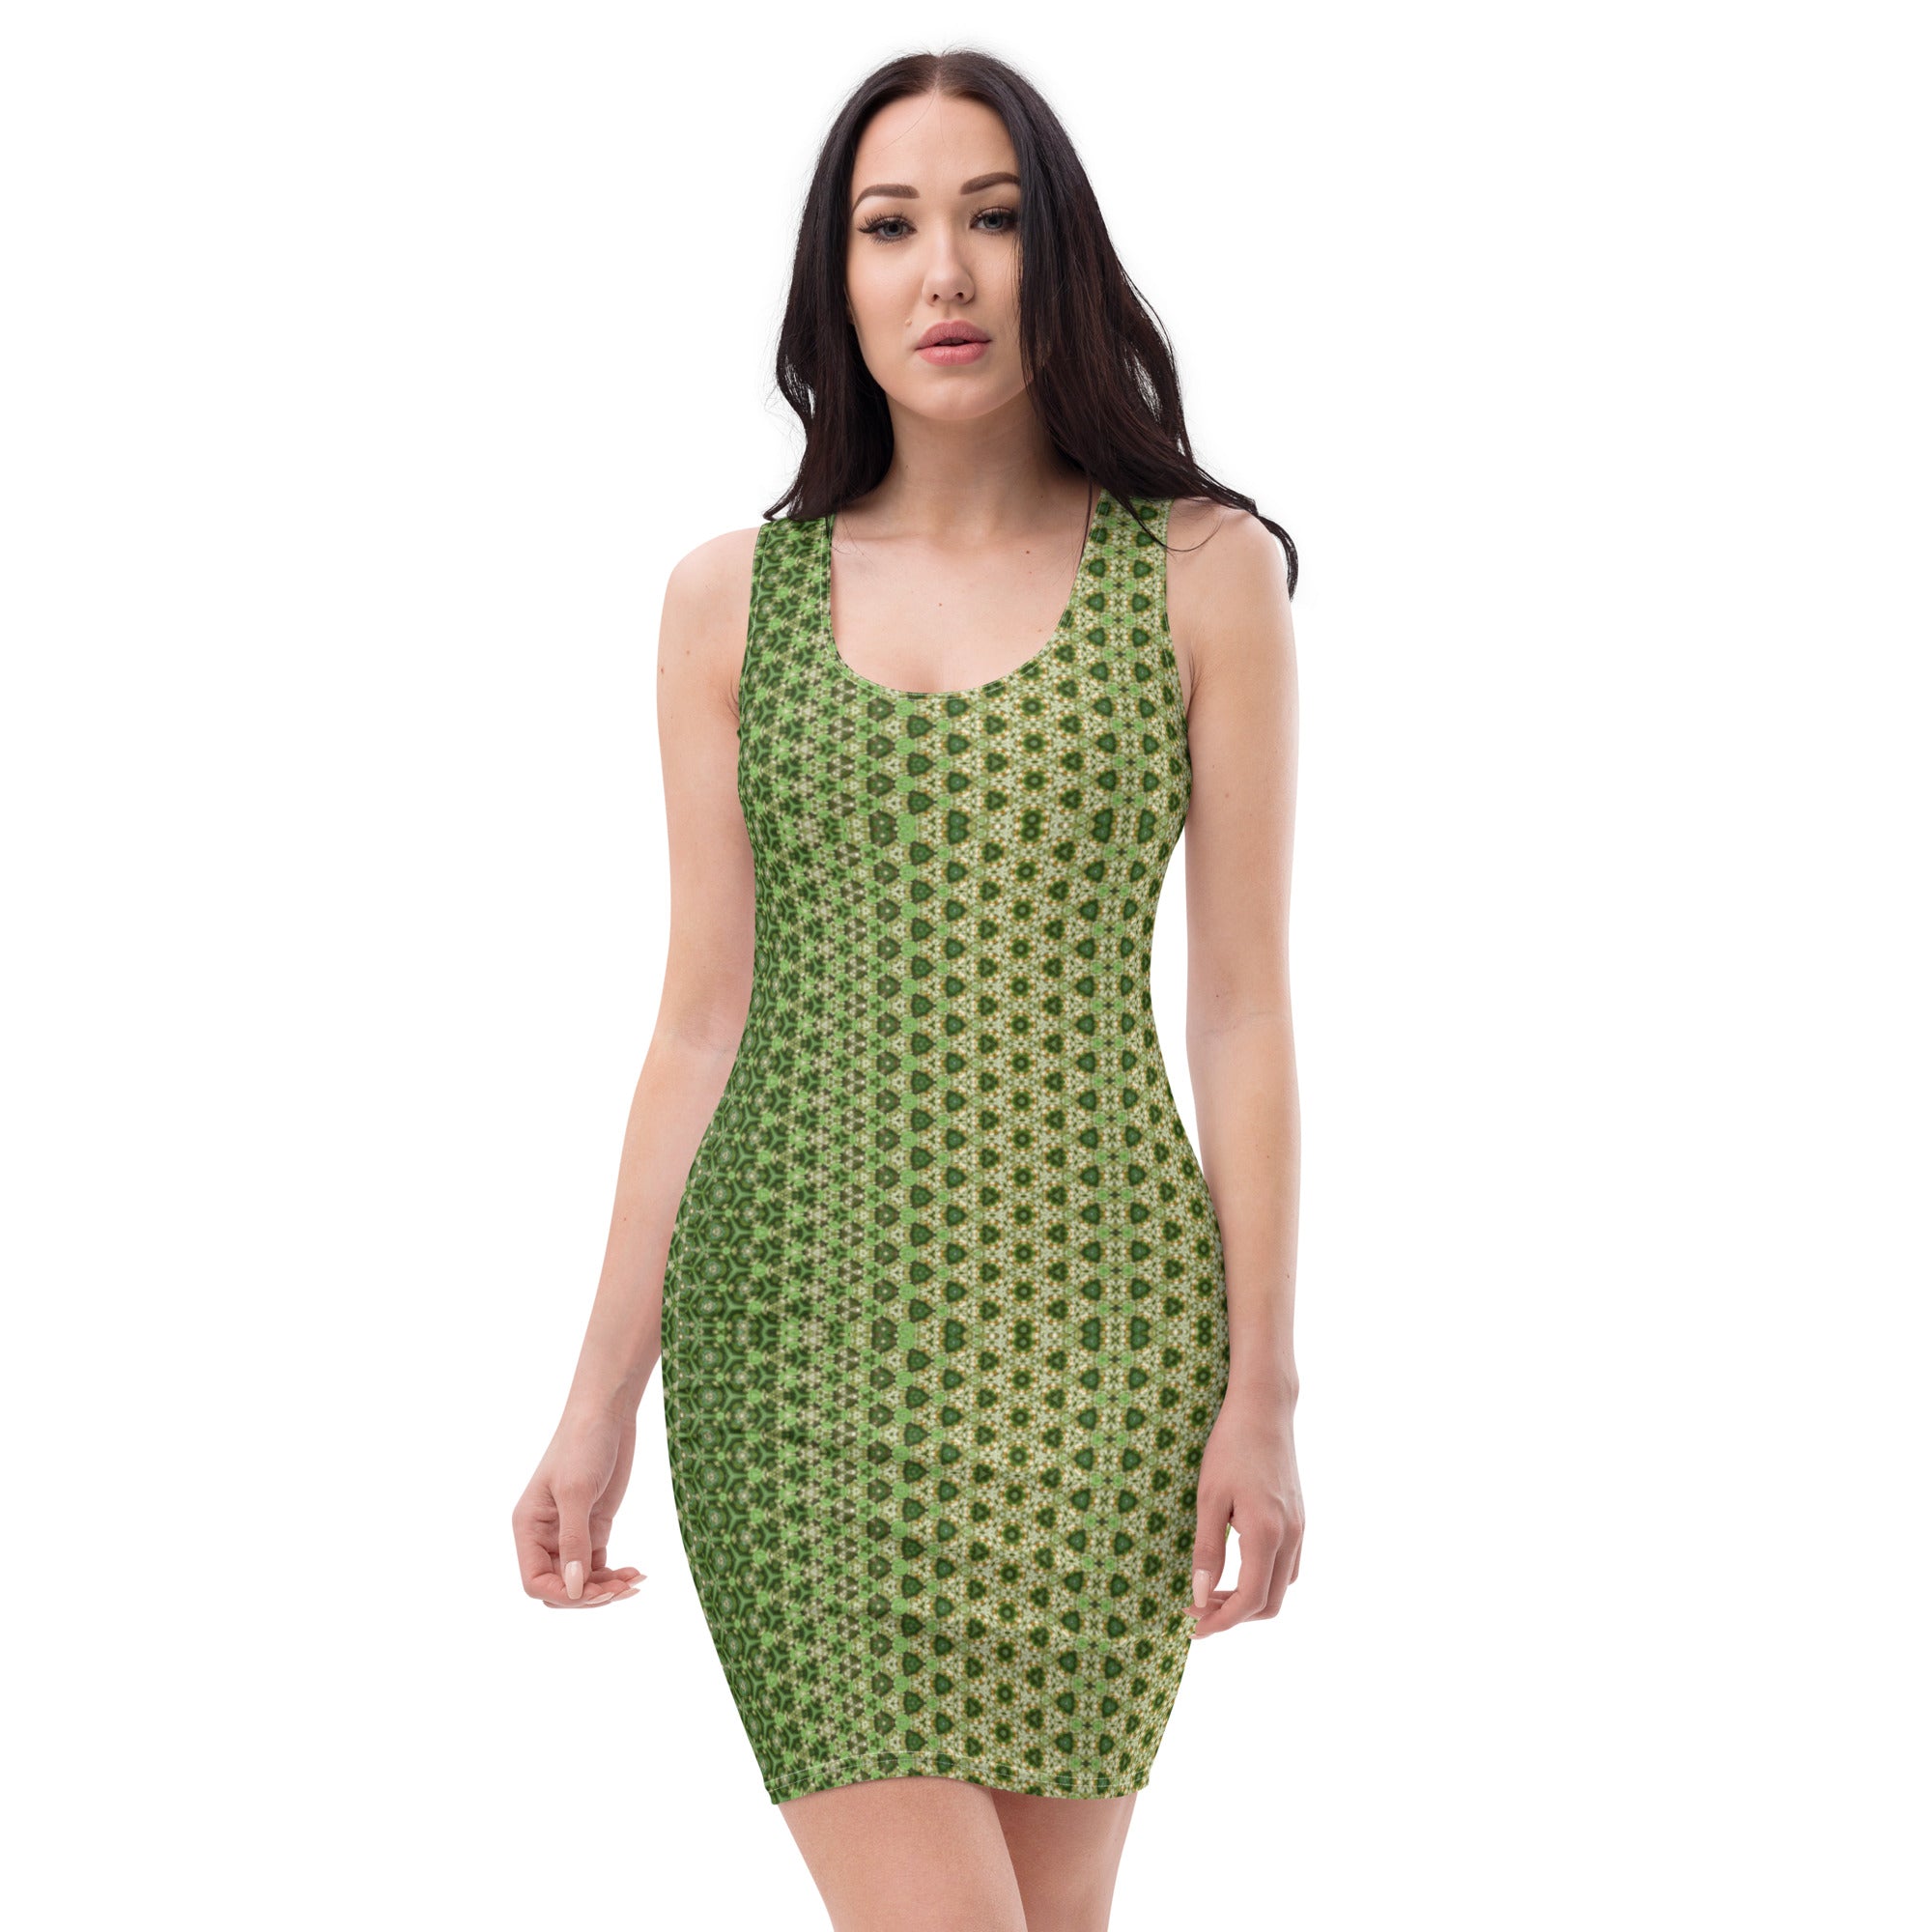 Scarabee Green Fitted Sublimation Cut & Sew Dress, by Sensus Studio Design